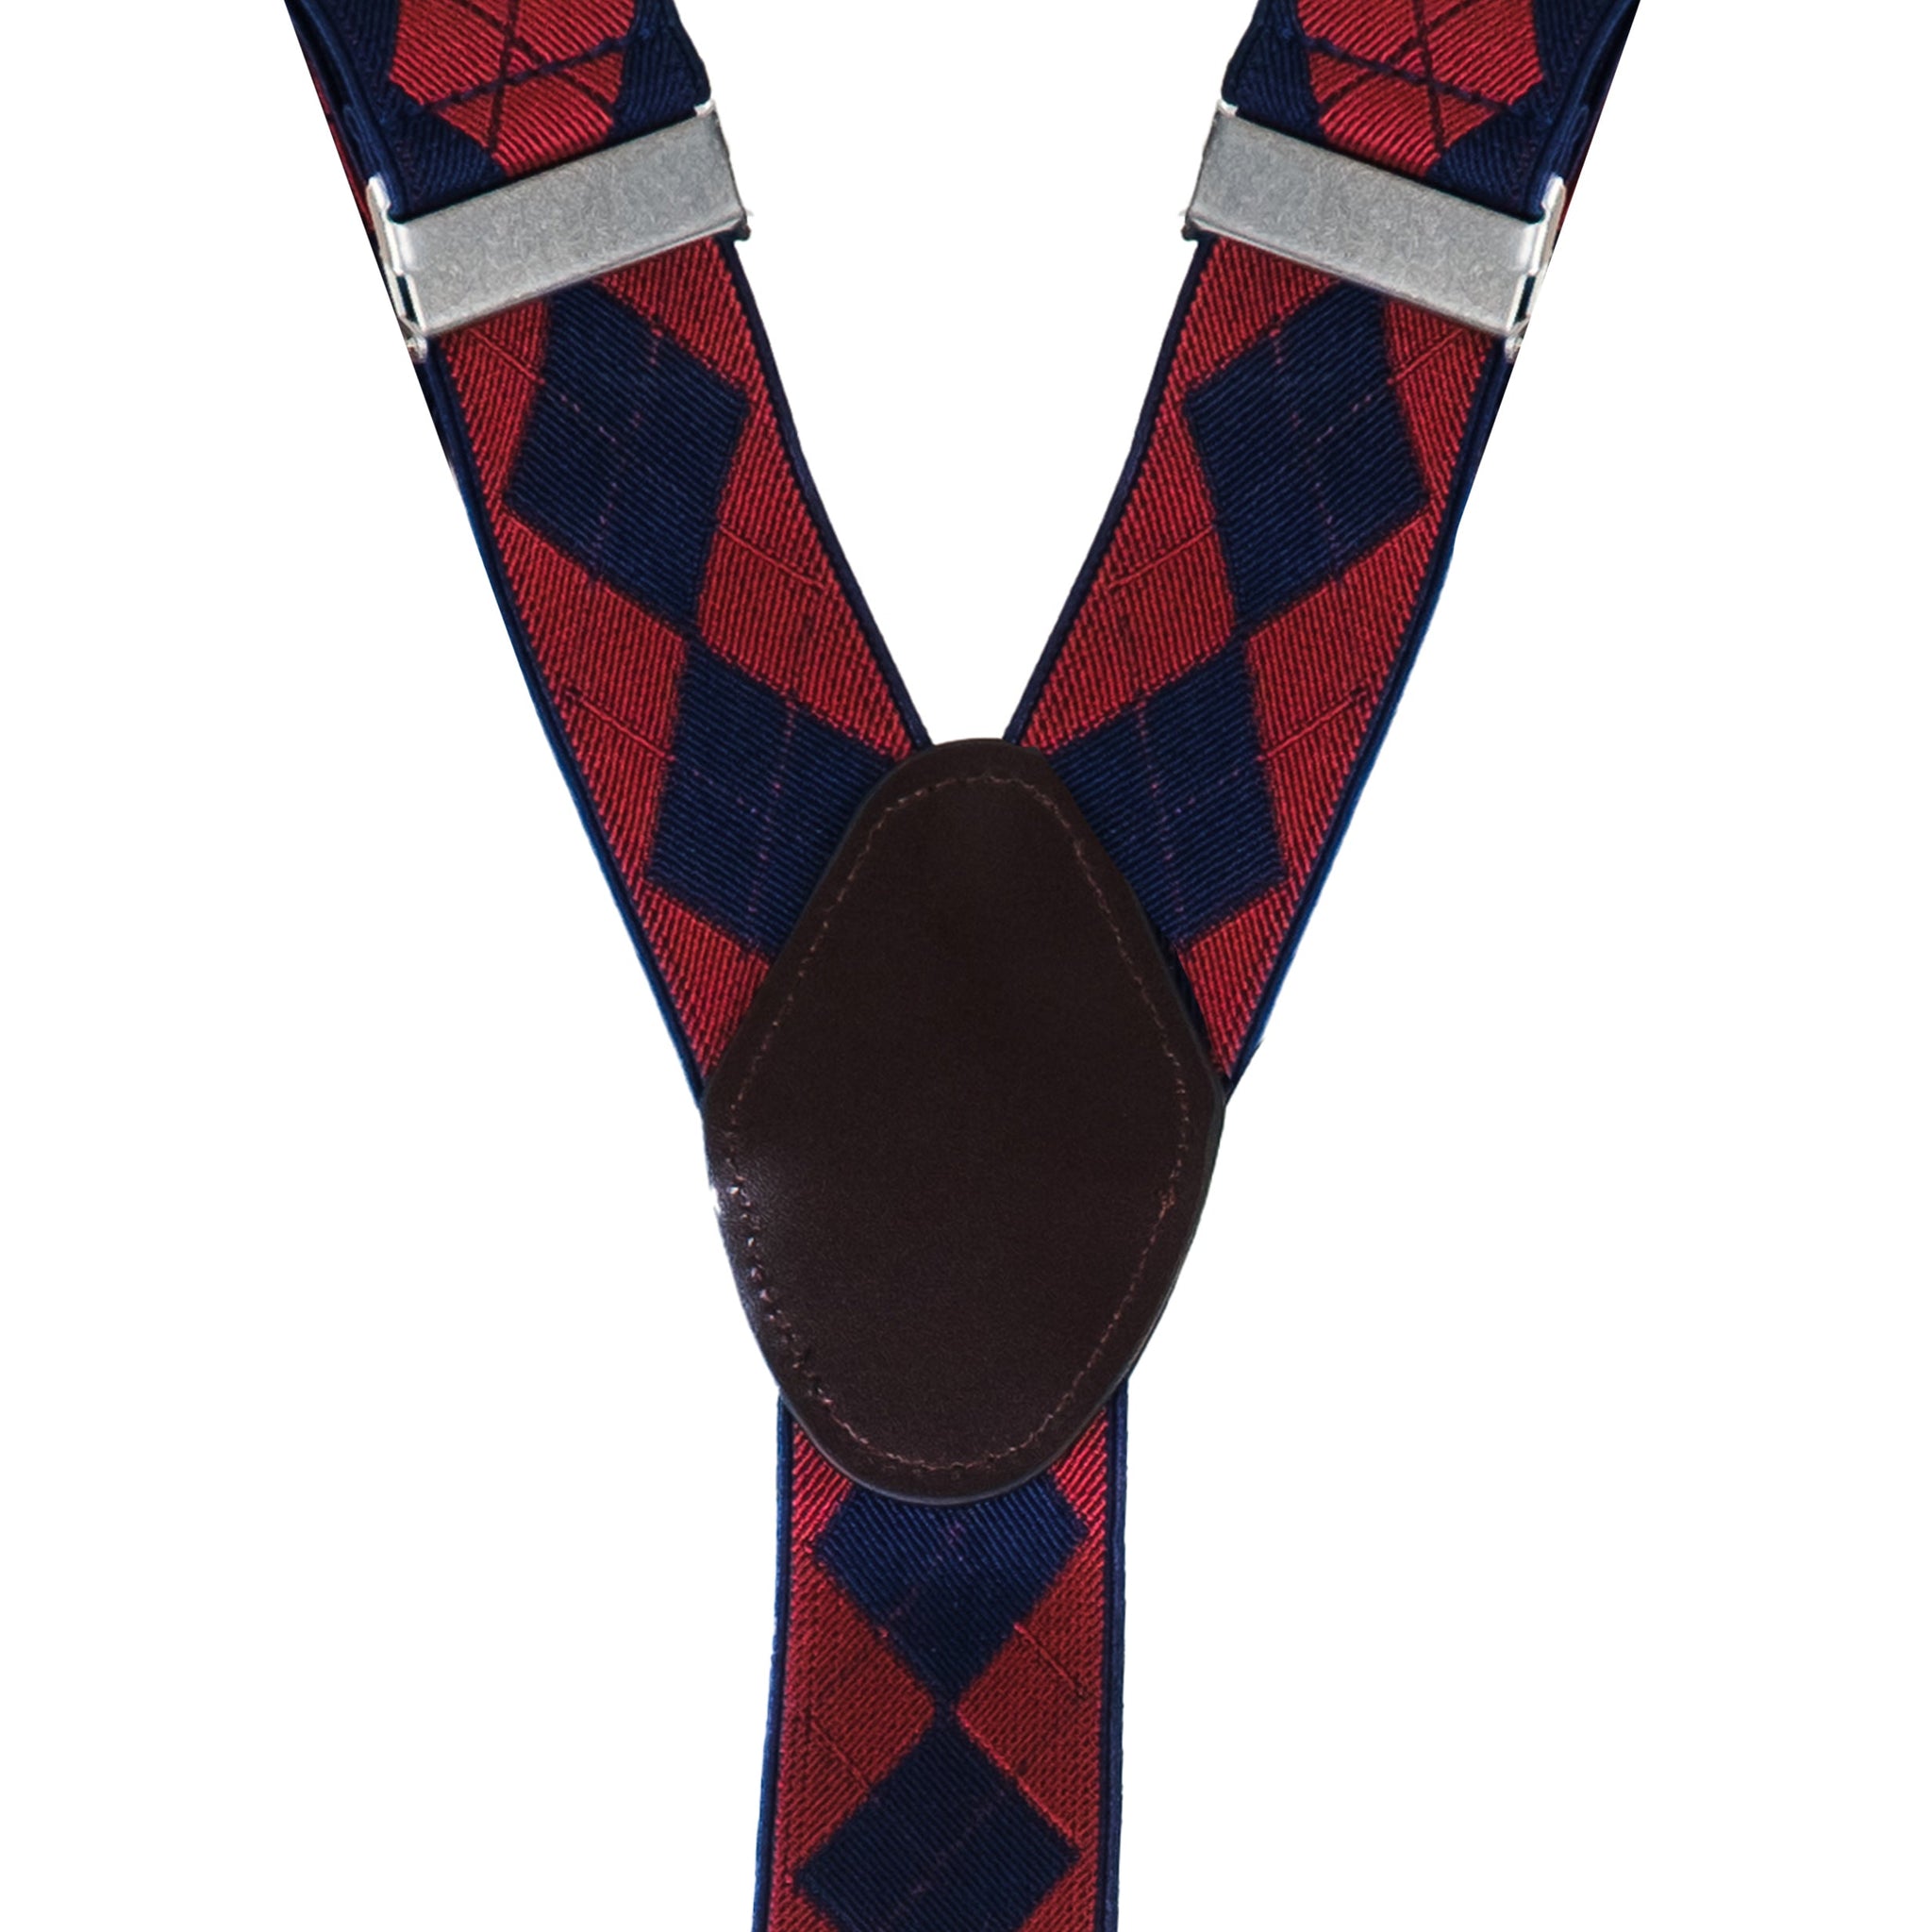 Chokore Stretchy Y-shaped Suspenders with 6-clips (Navy Blue & Red)